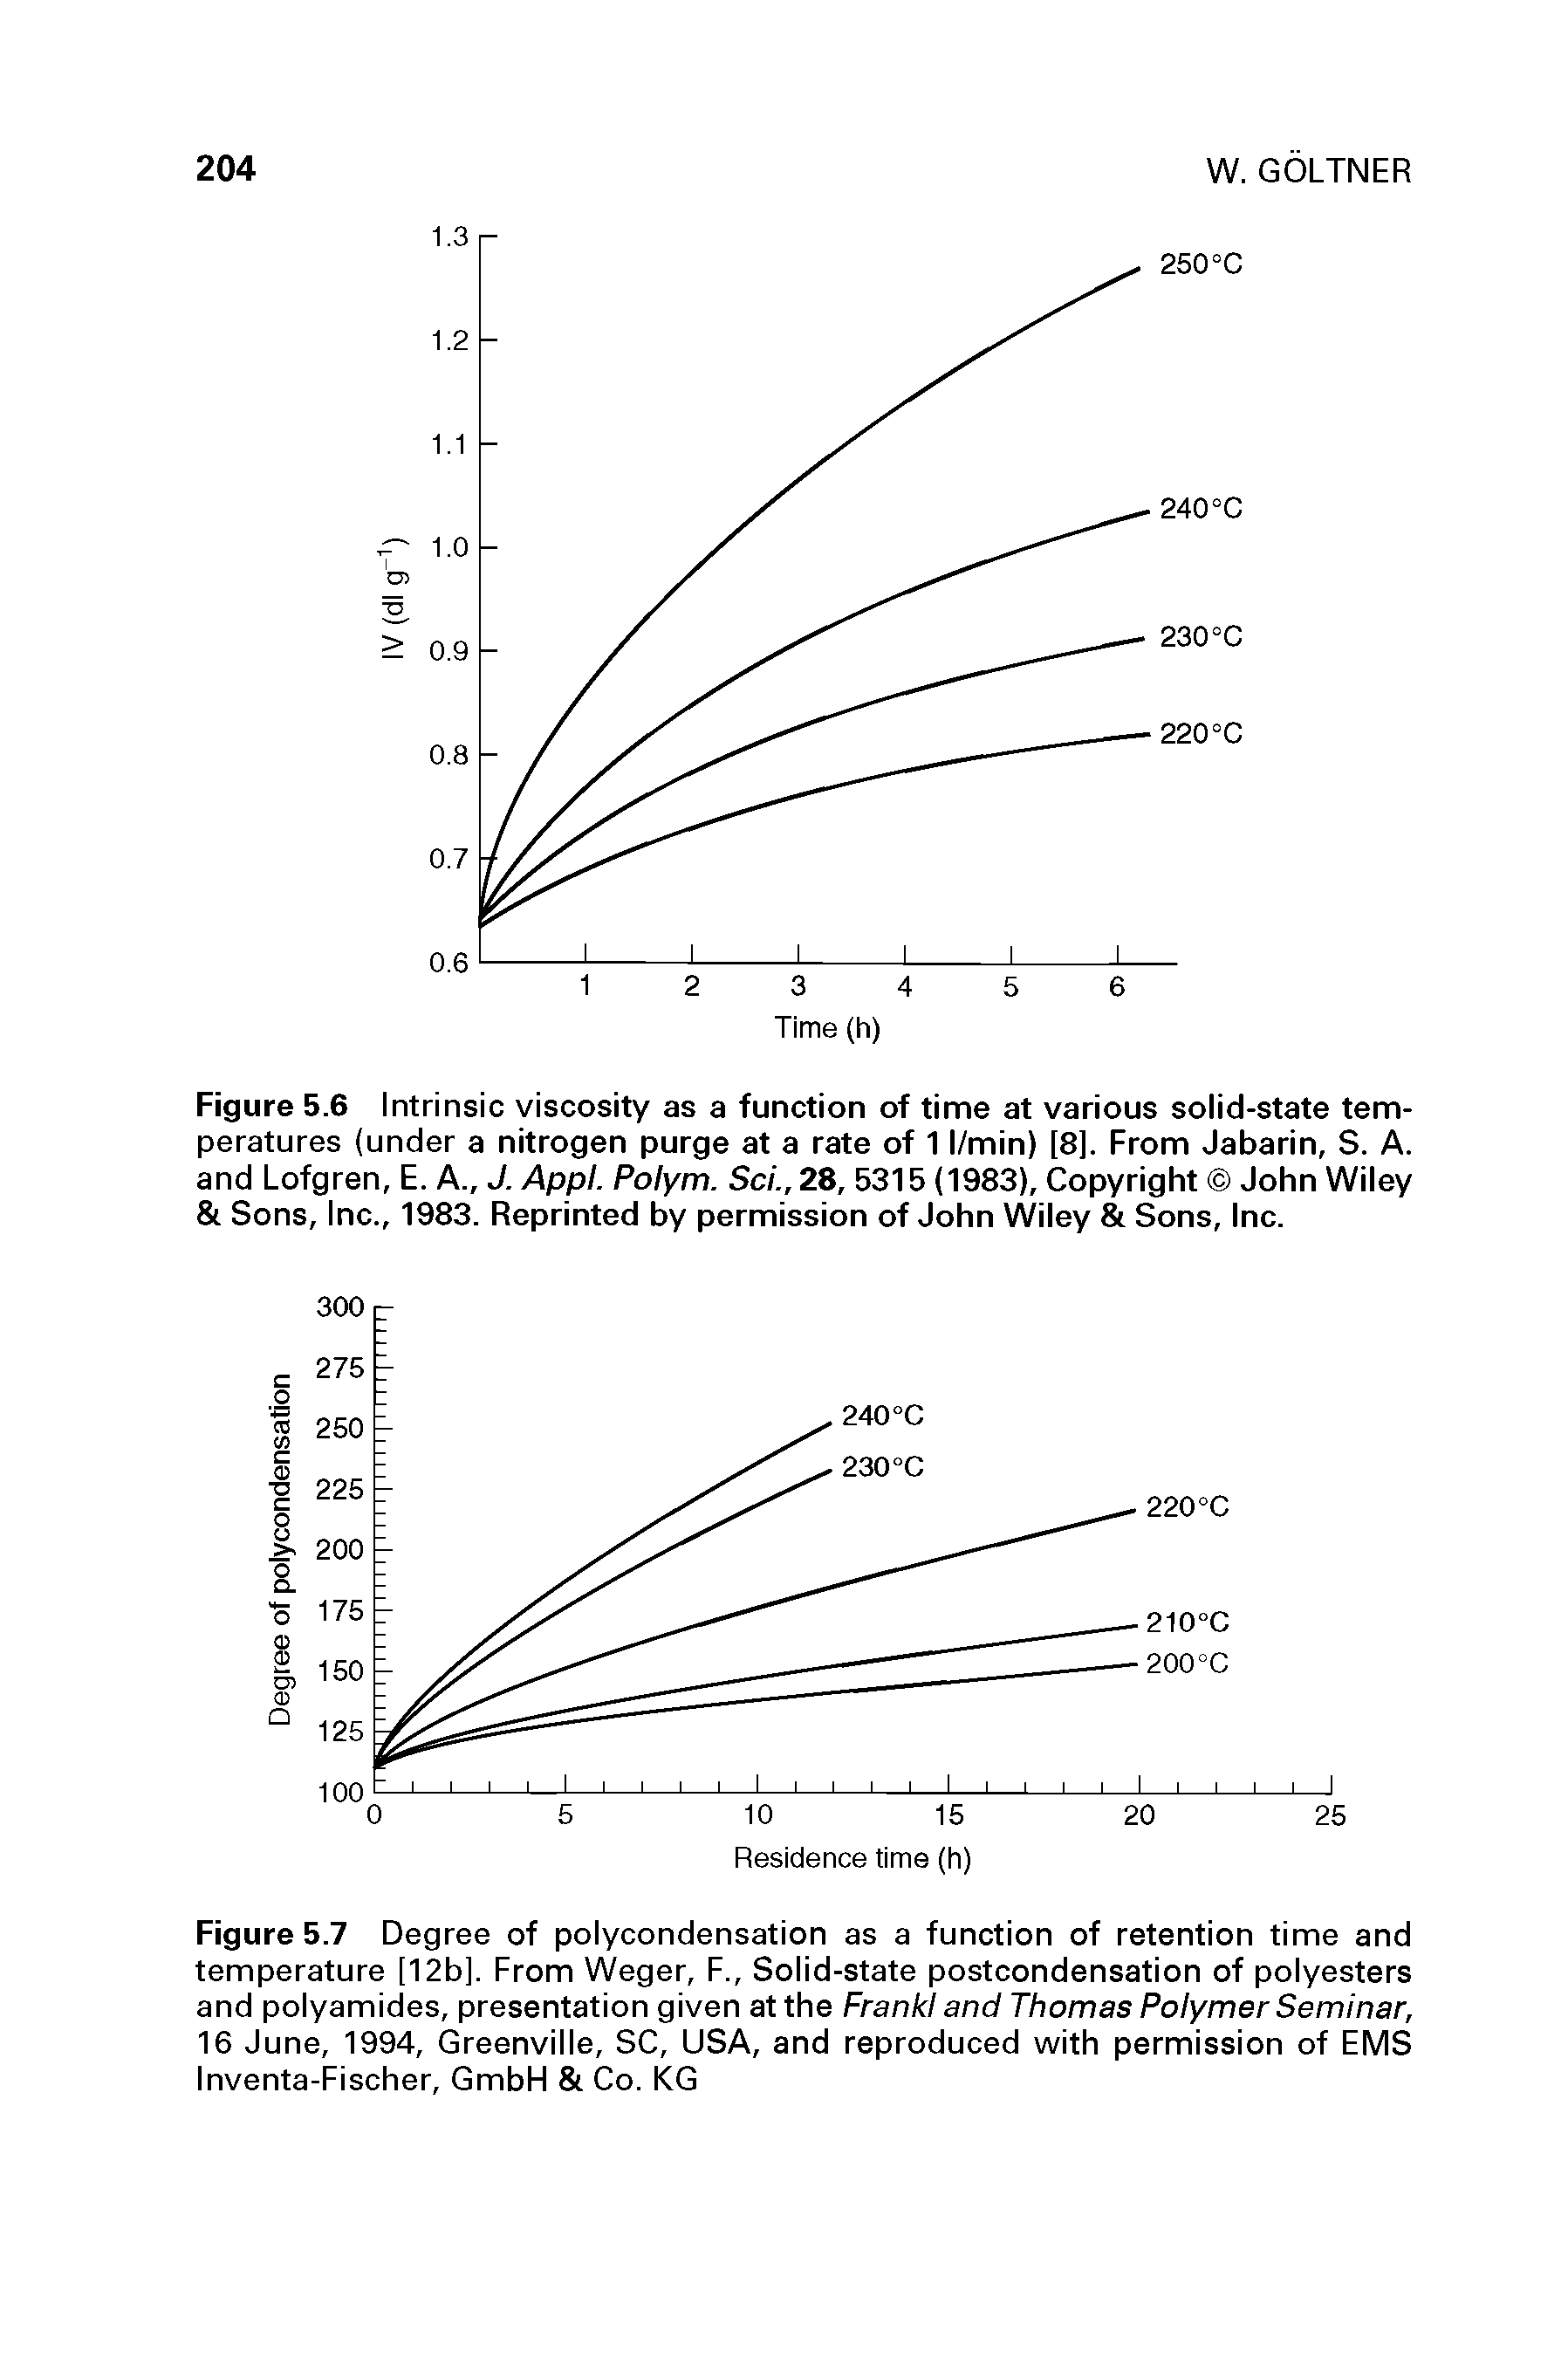 Figure 5.7 Degree of polycondensation as a function of retention time and temperature [12b]. From Weger, F., Solid-state postcondensation of polyesters and polyamides, presentation given at the FrankI and Thomas Polymer Seminar, 16 June, 1994, Greenville, SC, USA, and reproduced with permission of EMS Inventa-Fischer, GmbH Co. KG...